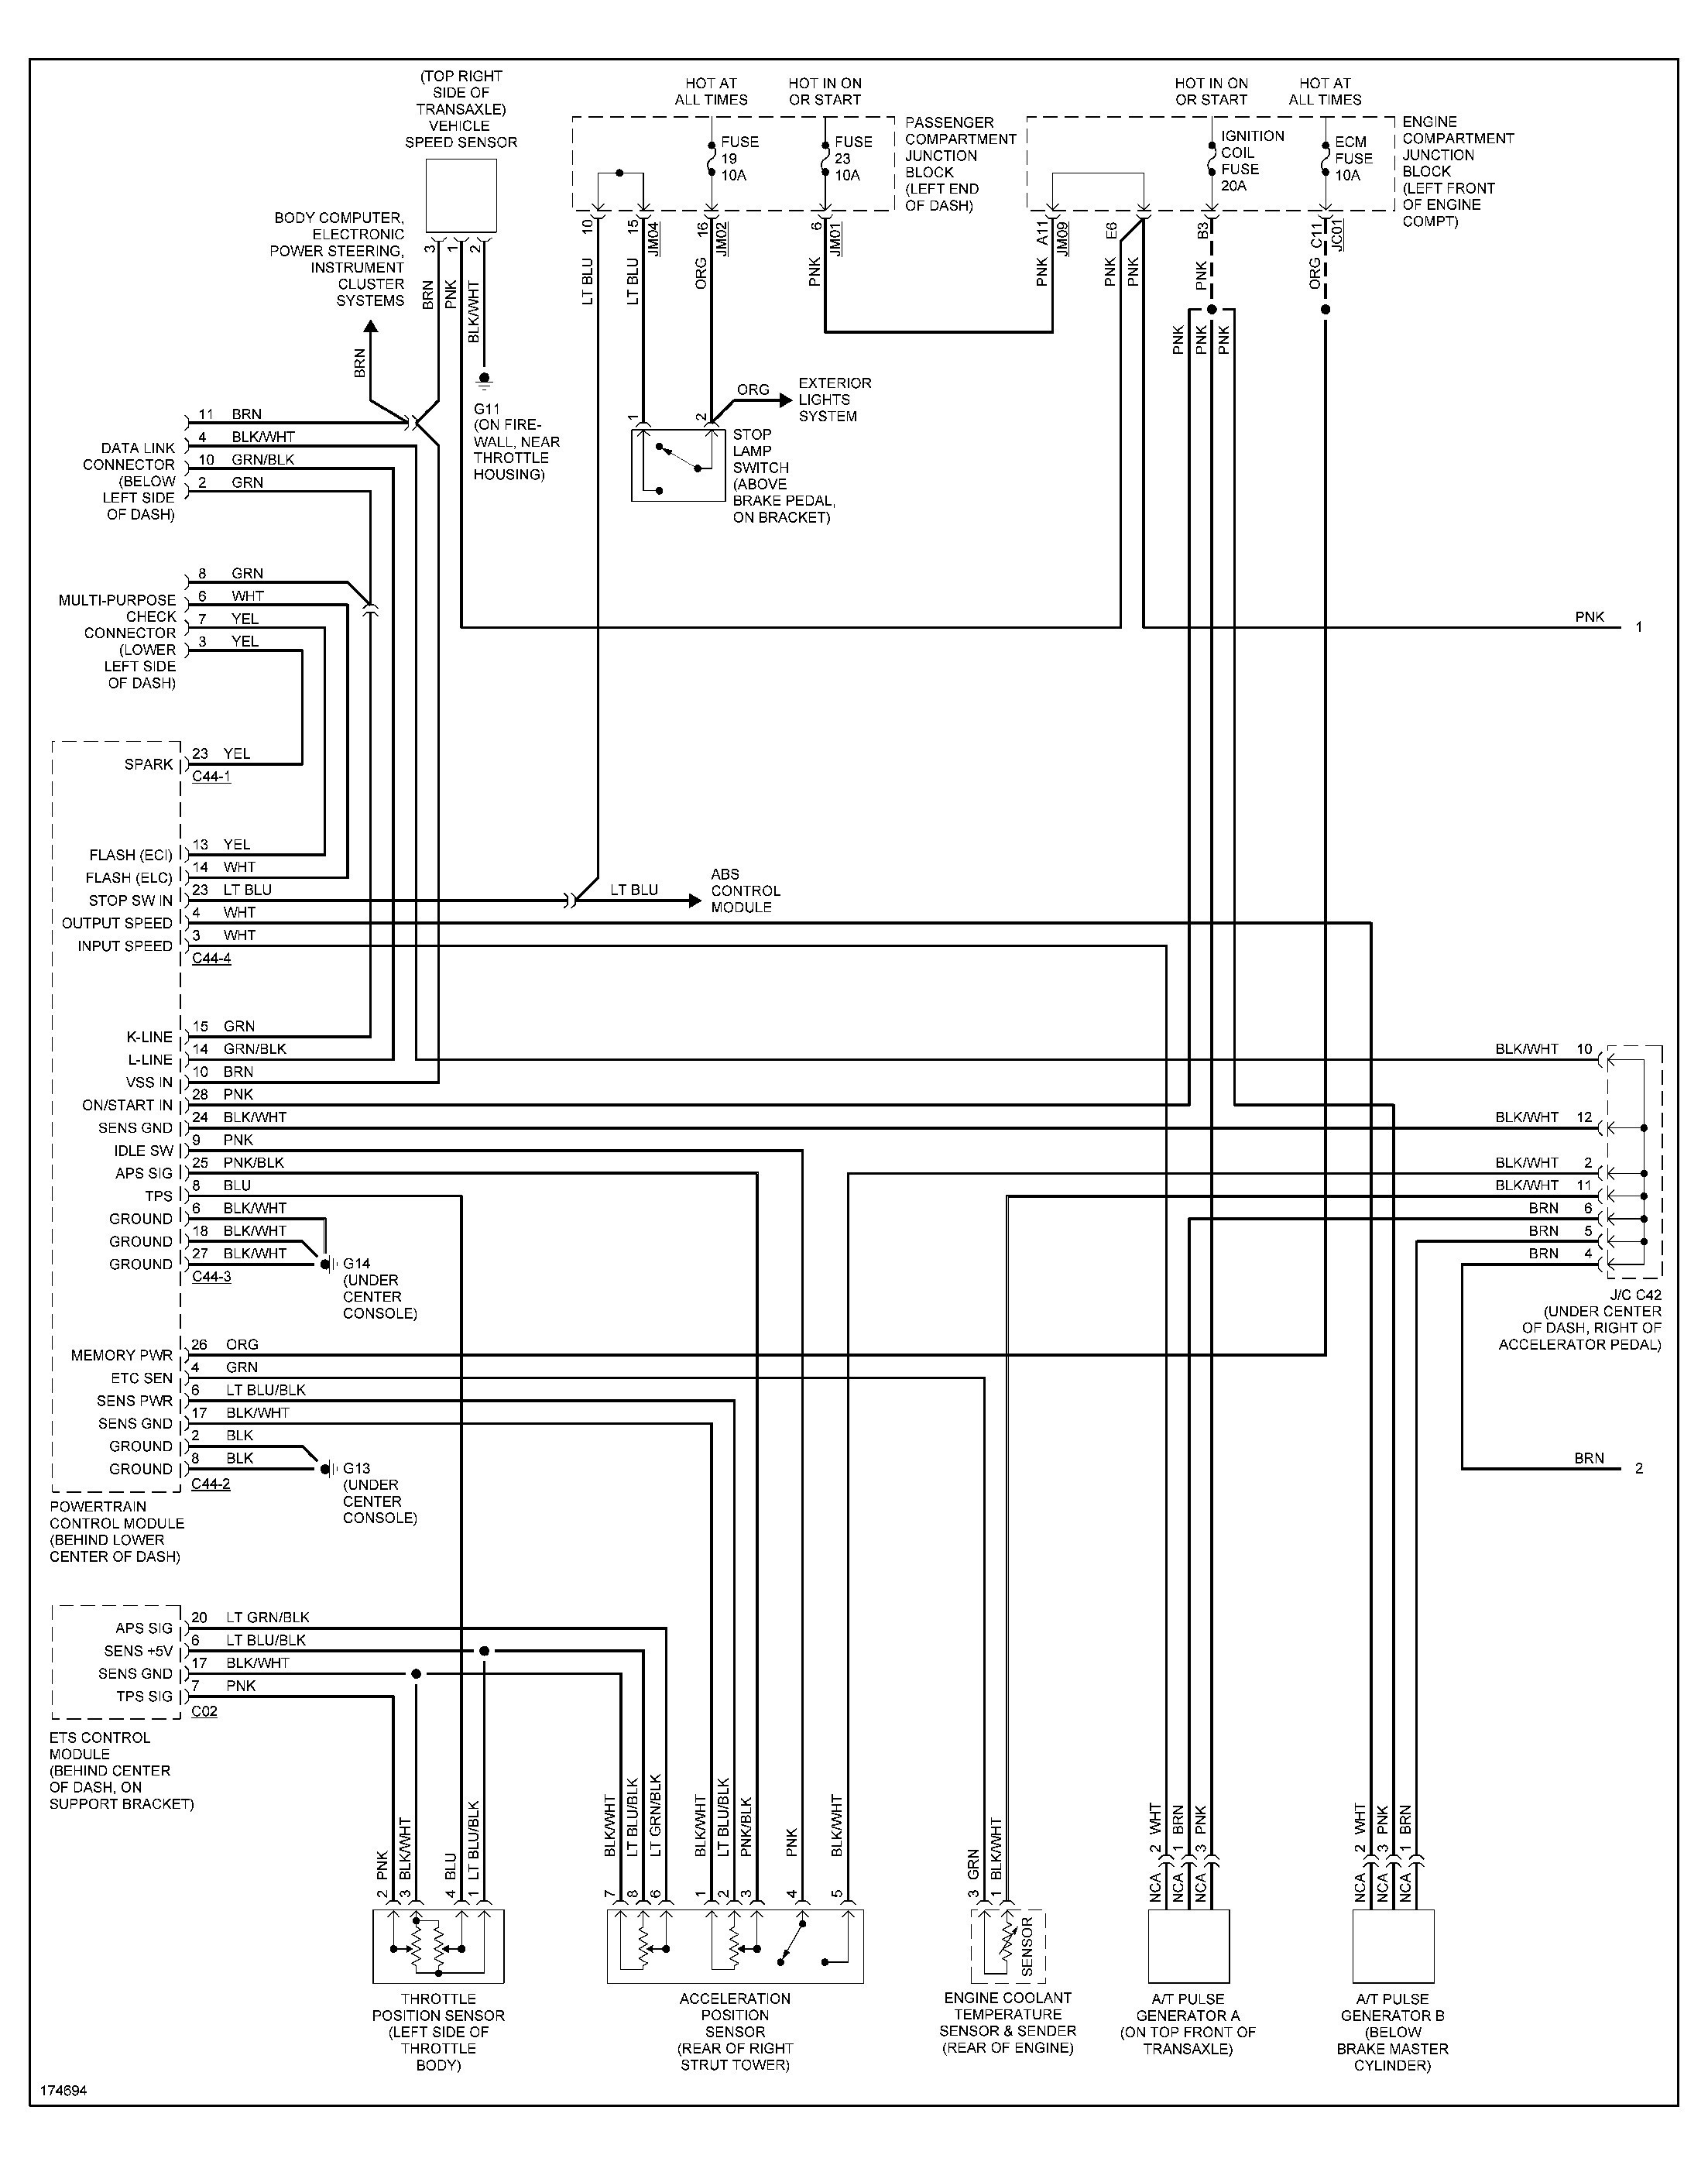 2005 Hyundai Accent Stereo Wiring Diagram from mainetreasurechest.com